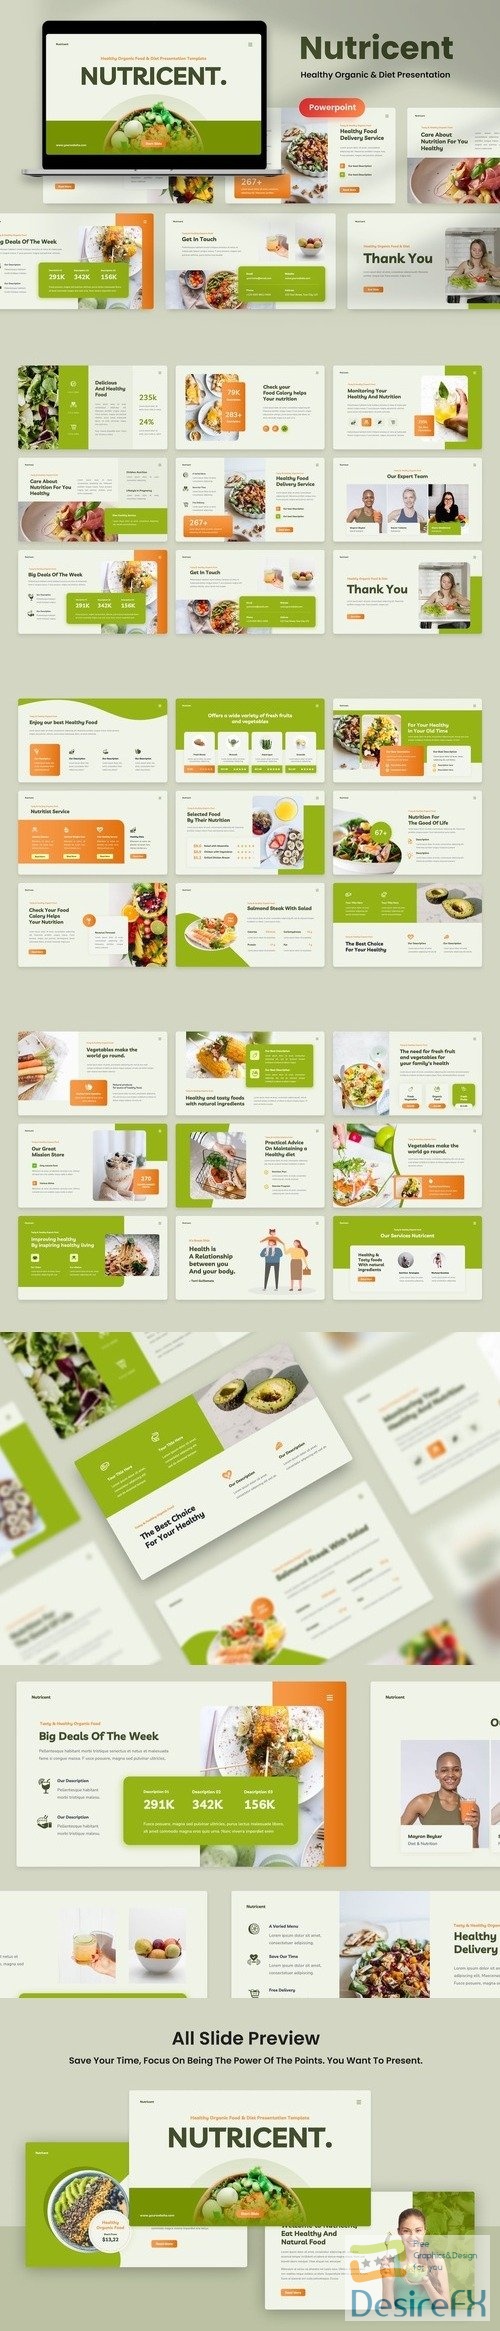 Nutricent - Healthy Organic Food Diet PowerPoint, Keynote and Google Slides